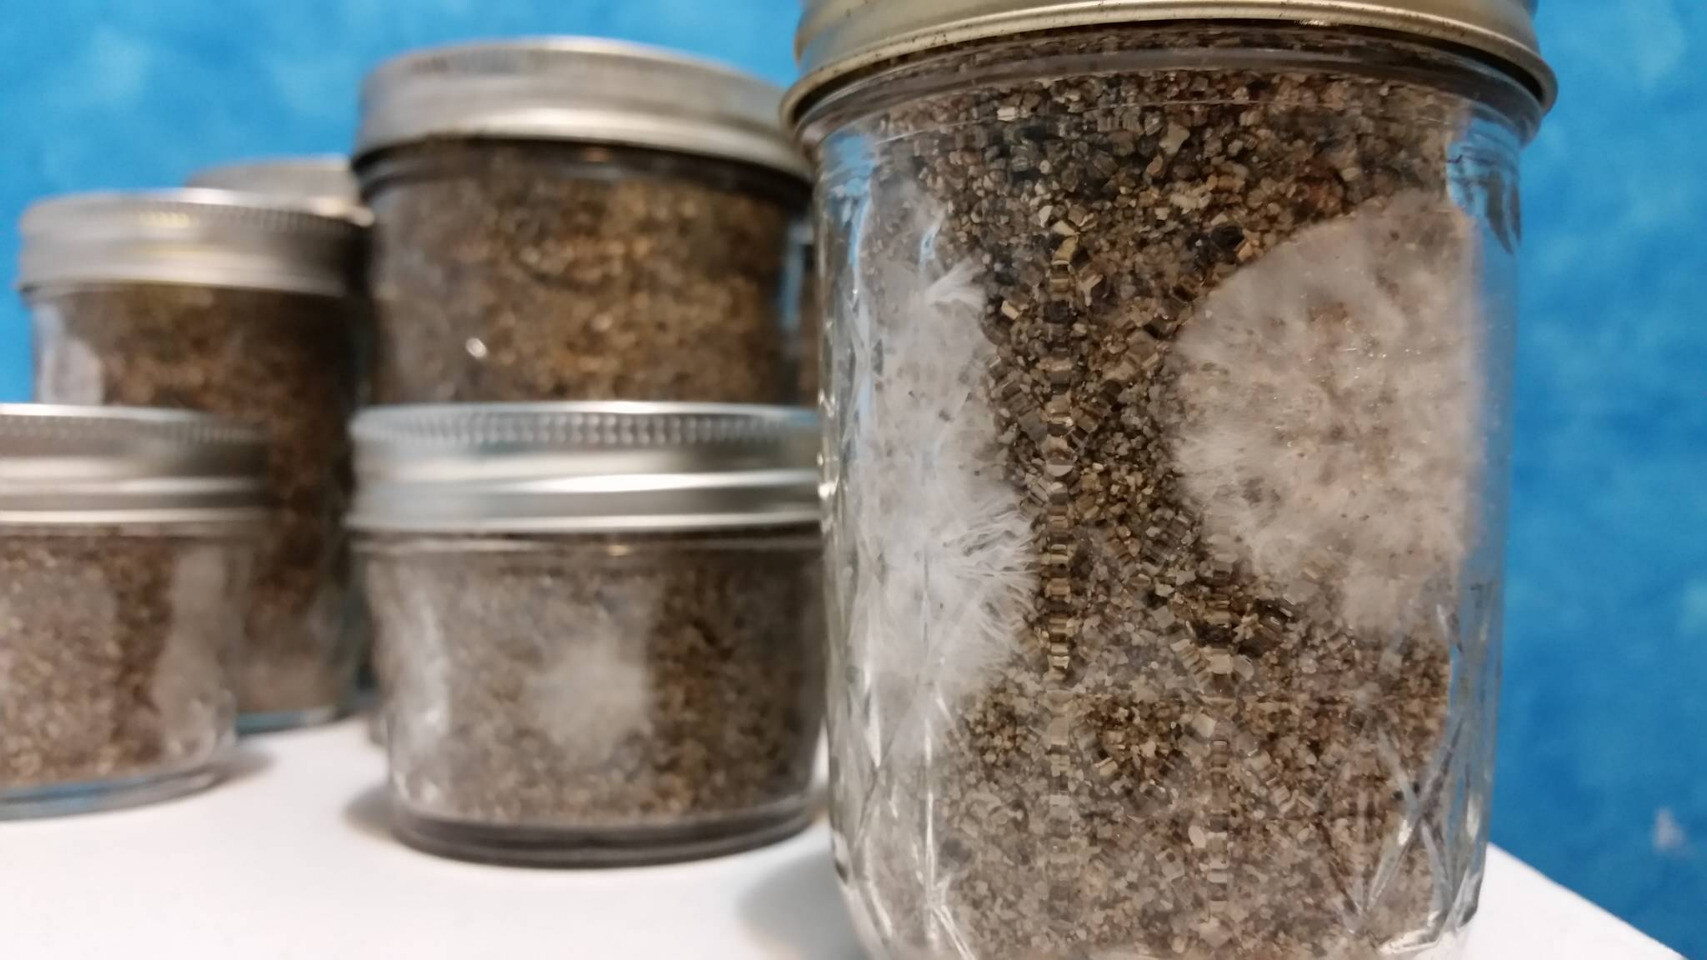 mycelium growing in the substrate